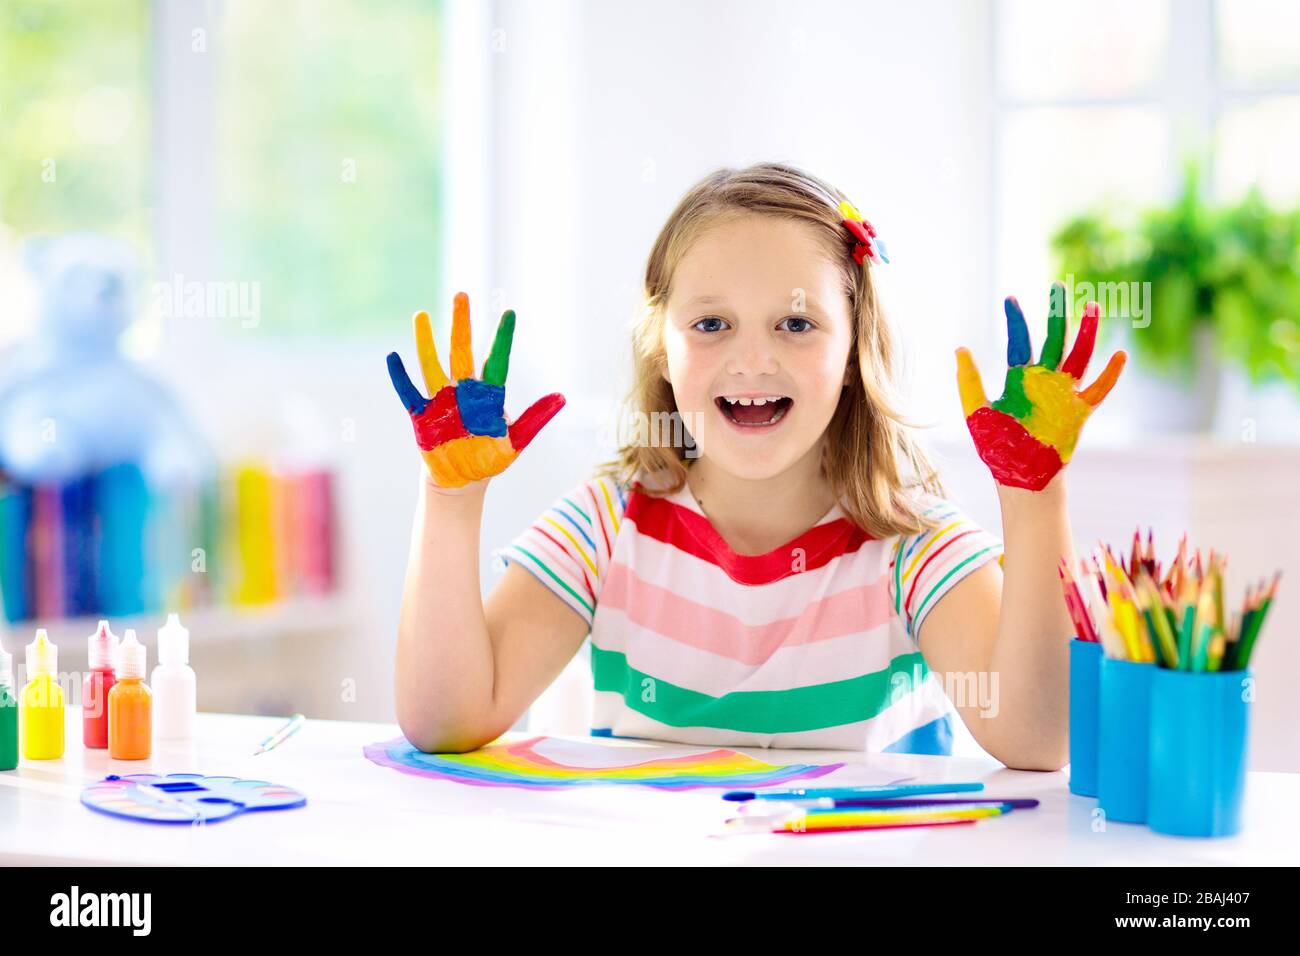 Kids paint. Child painting in white sunny study room. Little girl ...